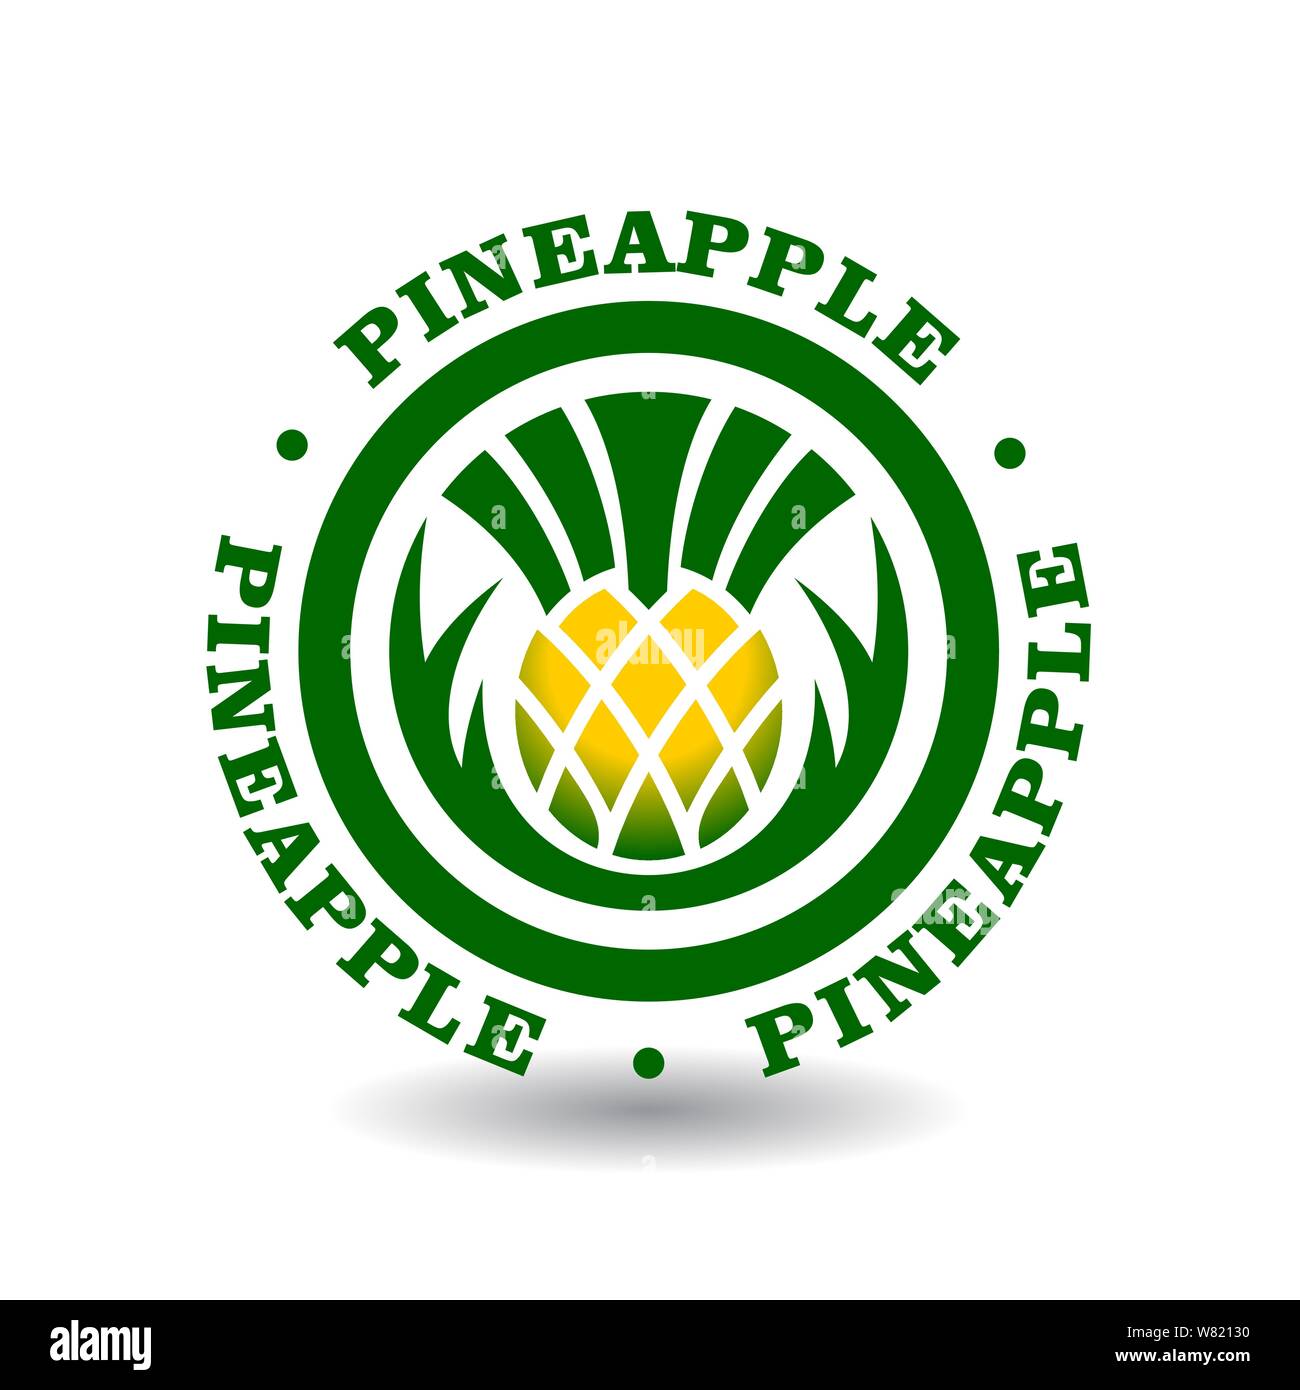 Simple round logotype with pineapple symbol Stock Vector